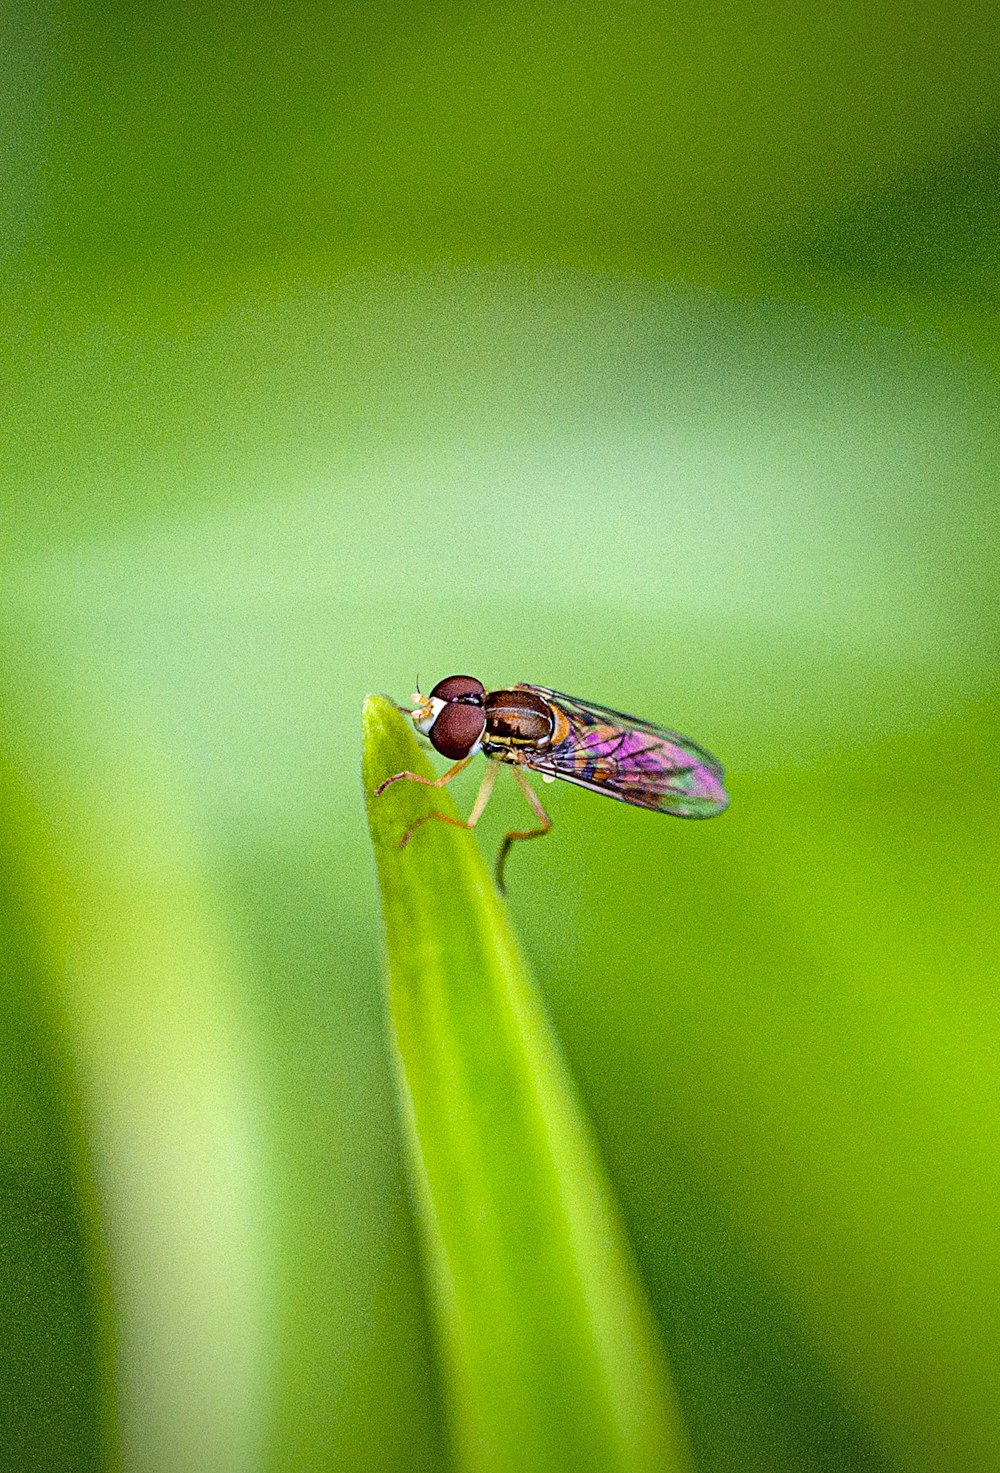 insect perched on green leaf